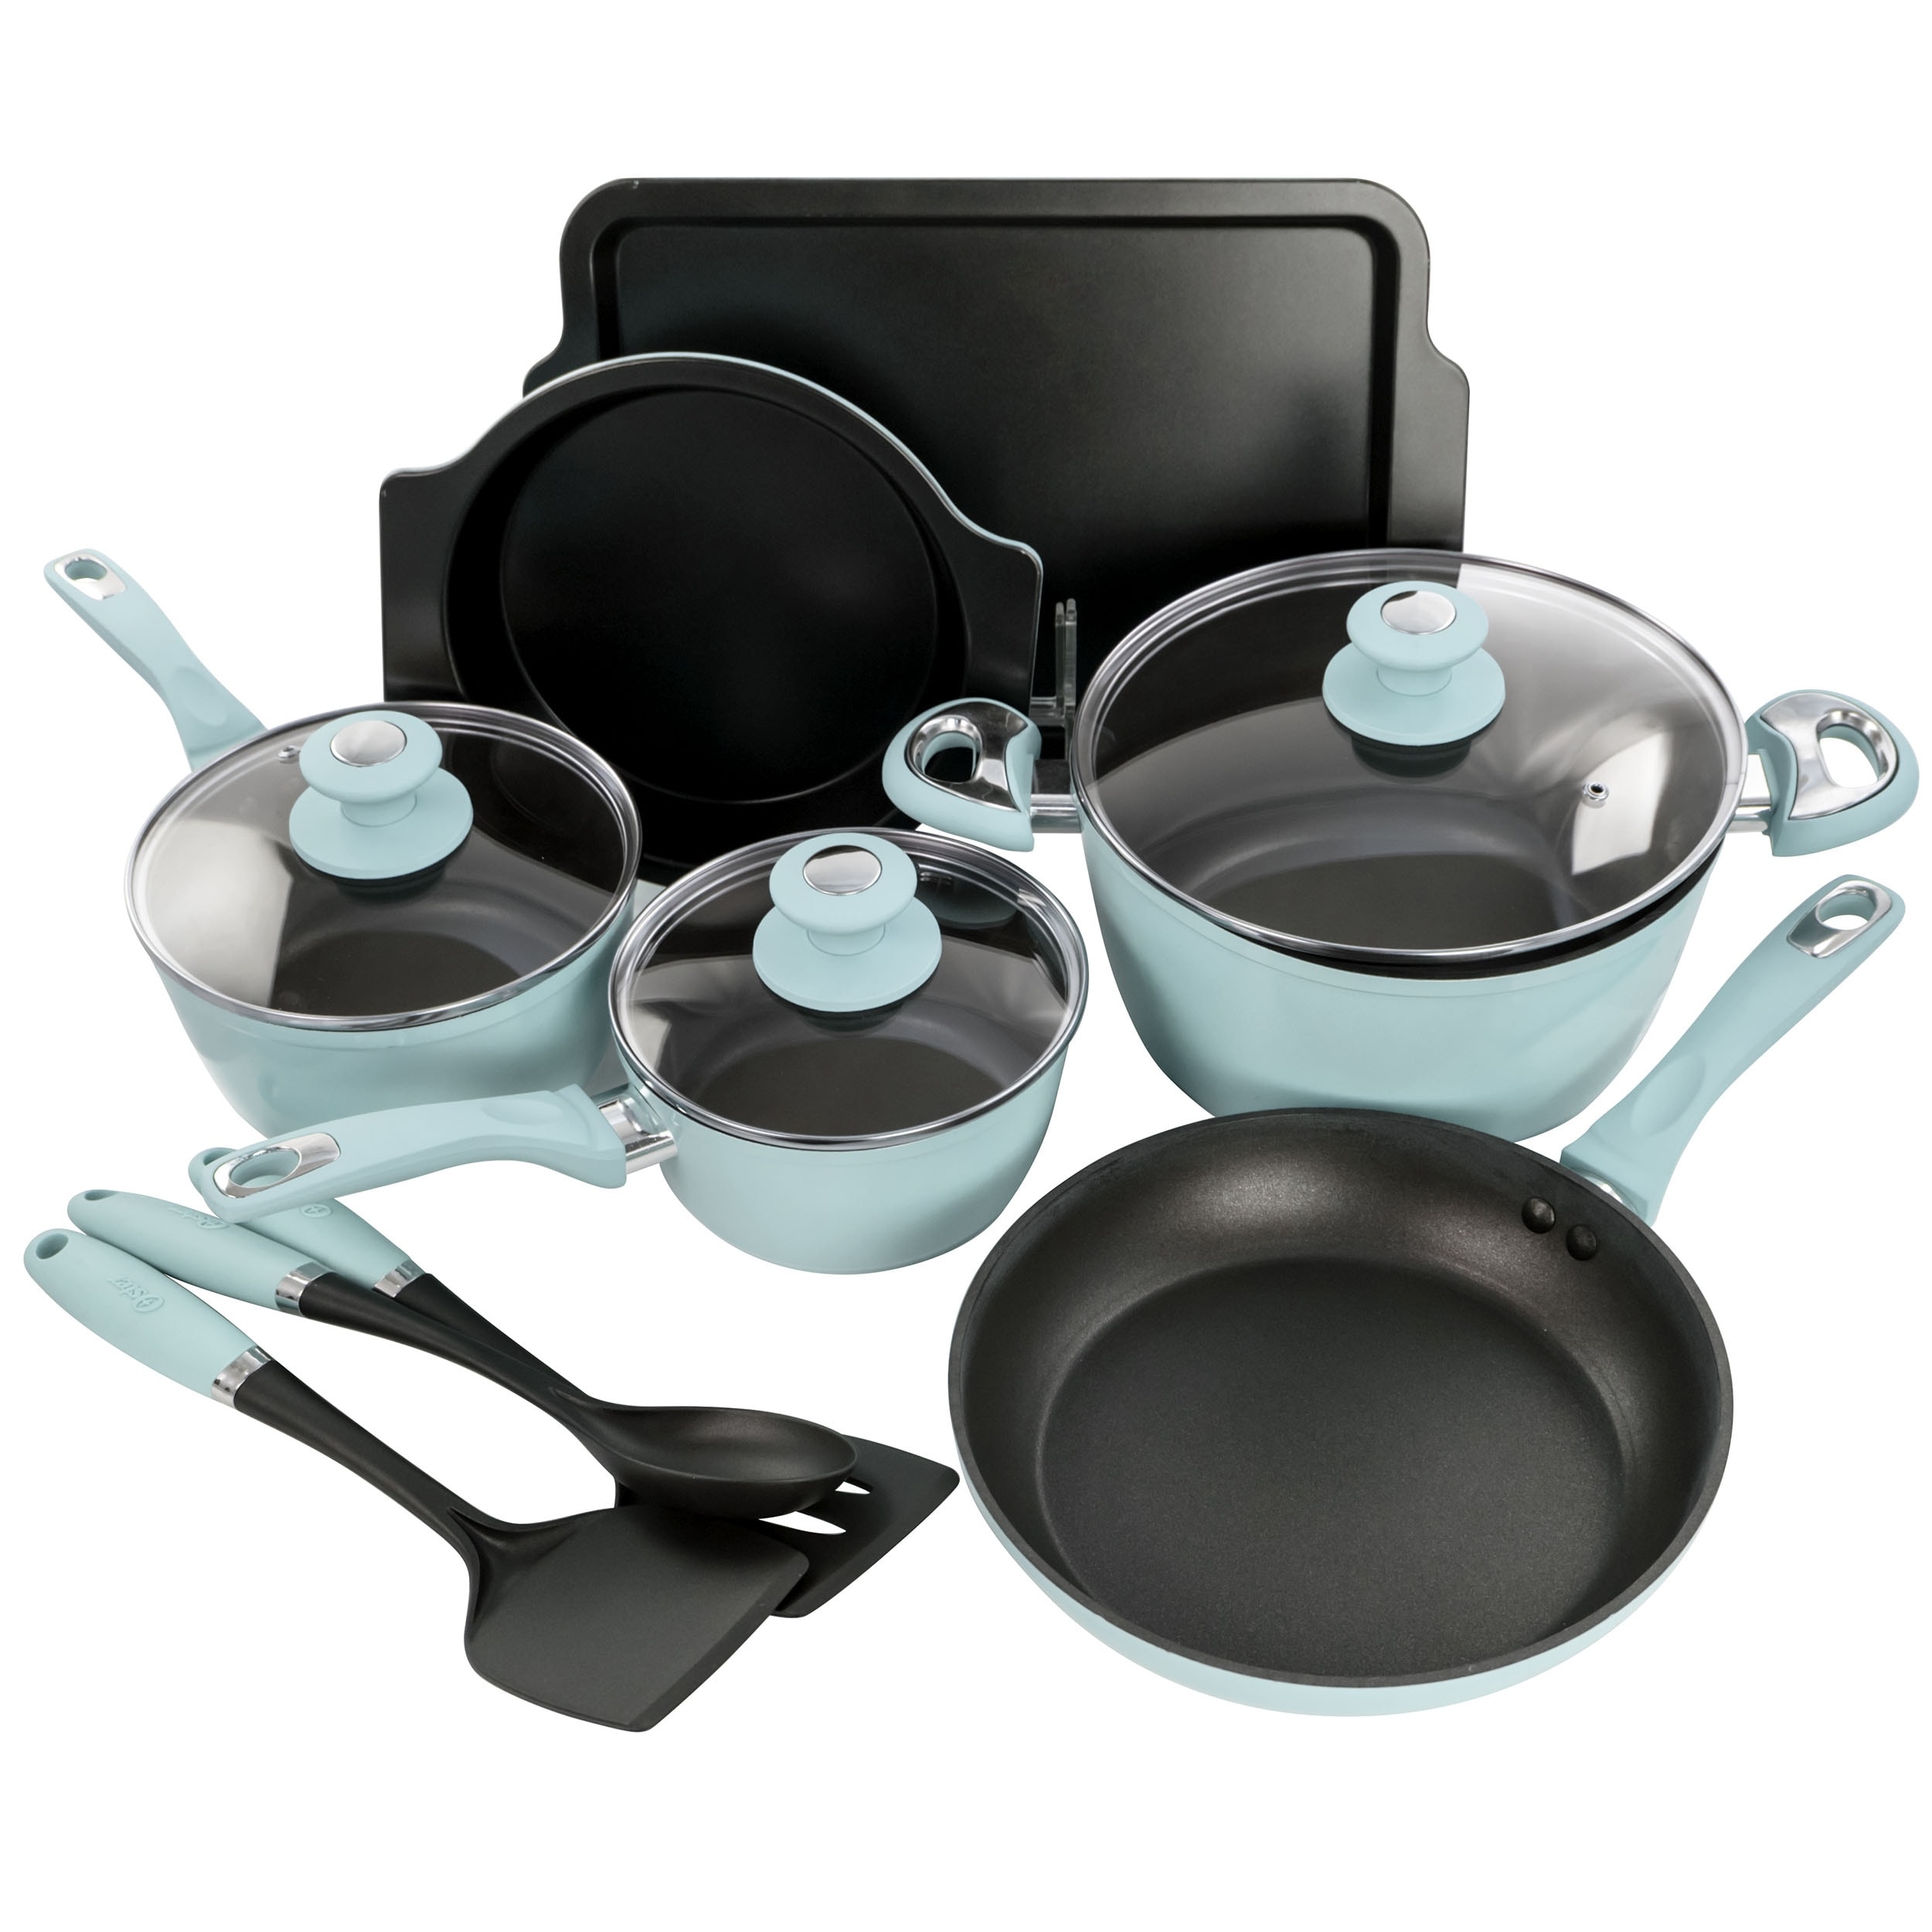 https://ak1.ostkcdn.com/images/products/is/images/direct/aa7b24c95c95e71e3cce8a4c92dc86e1648dda43/Oster-Lynhurst-12Pc-Nonstick-Aluminum-Cookware-Set-in-Blue-with-Tools.jpg